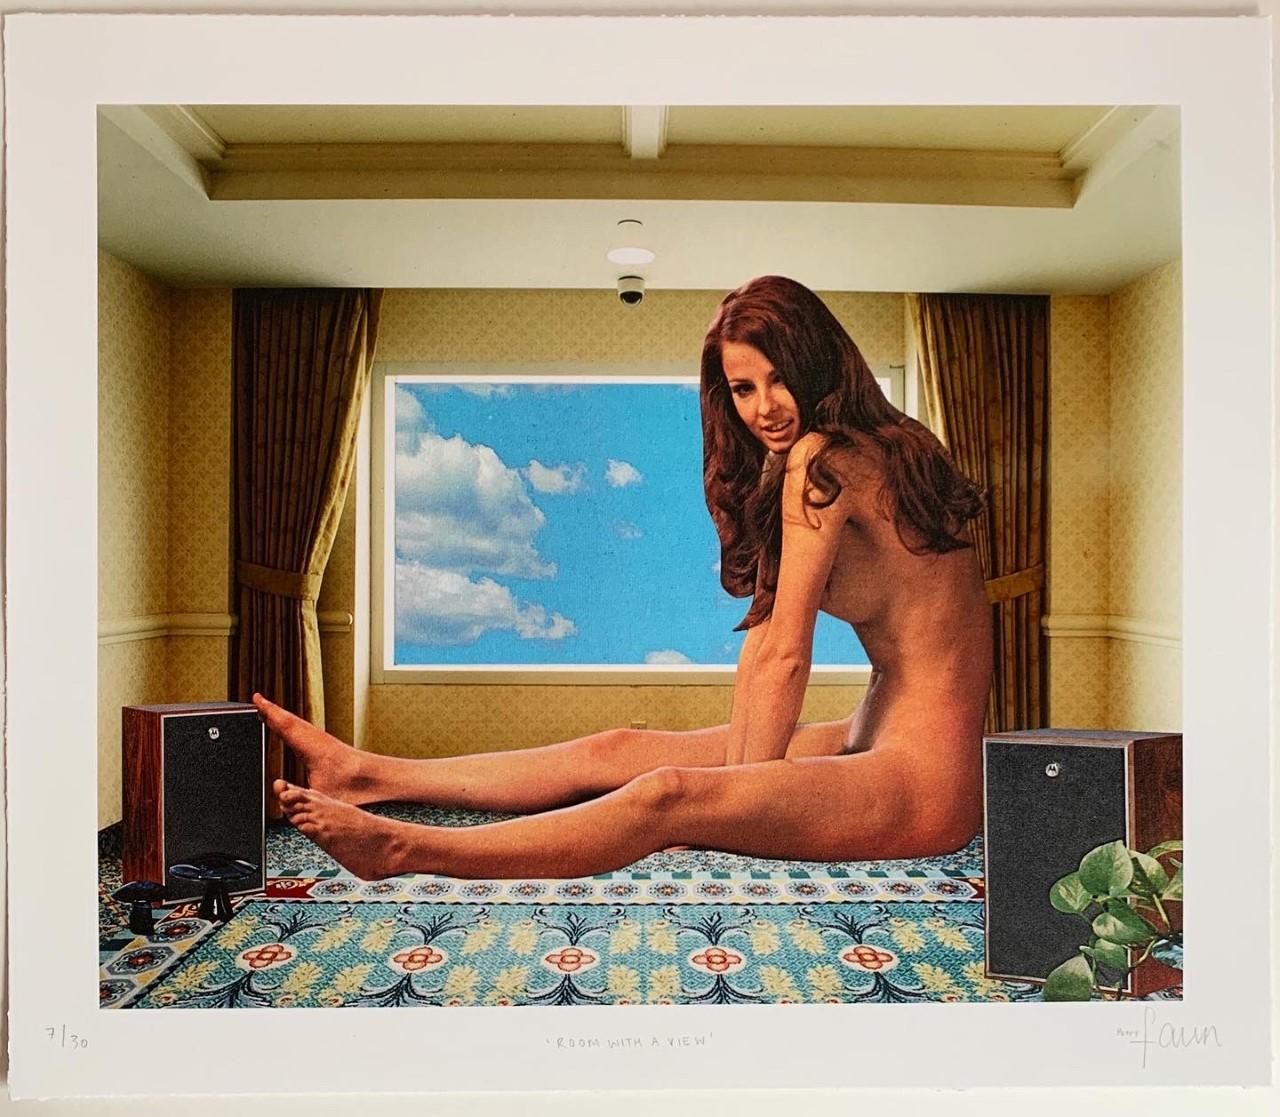 'Room With A View' is a collaboration artwork with artist Poppy Faun and photographer Richard Heeps. This glossy Silkscreen and Giclee is signed and numbered by Poppy and is a small edition of 30. Printed on 330gsm Somerset Cotton Velvet Paper with